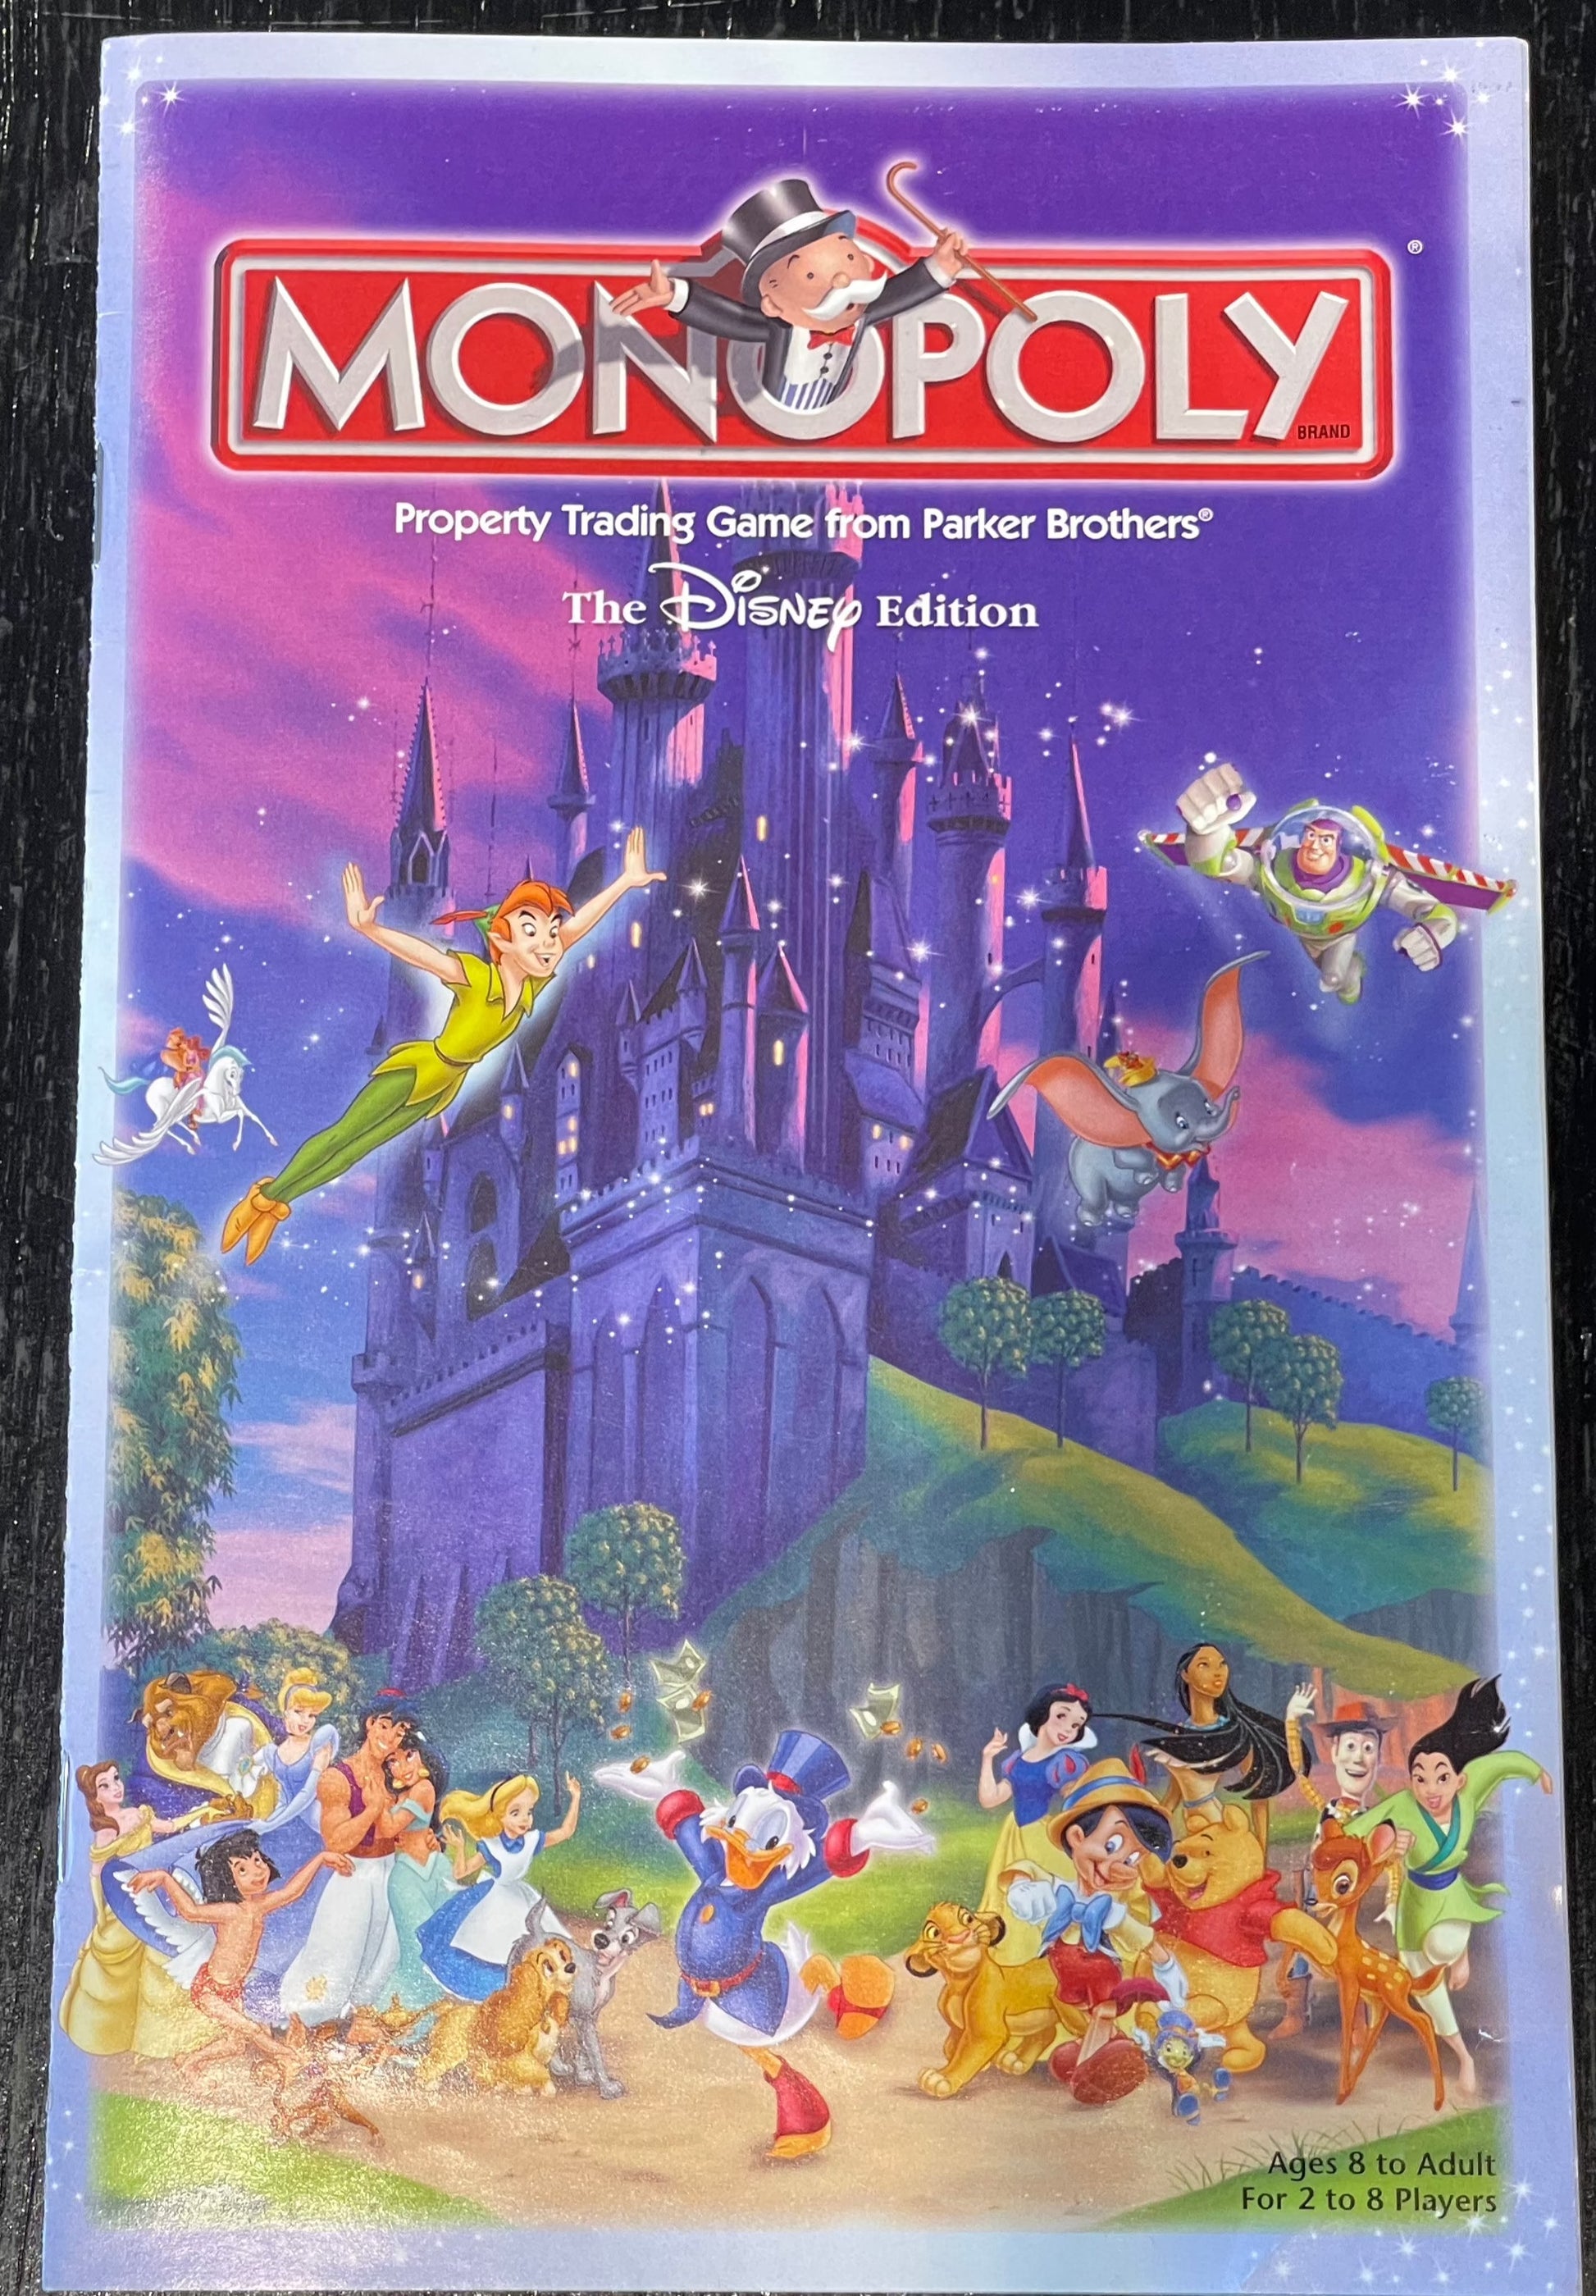 Conundrum House Game Library - Monopoly - the Disney Edition player guide front cover.